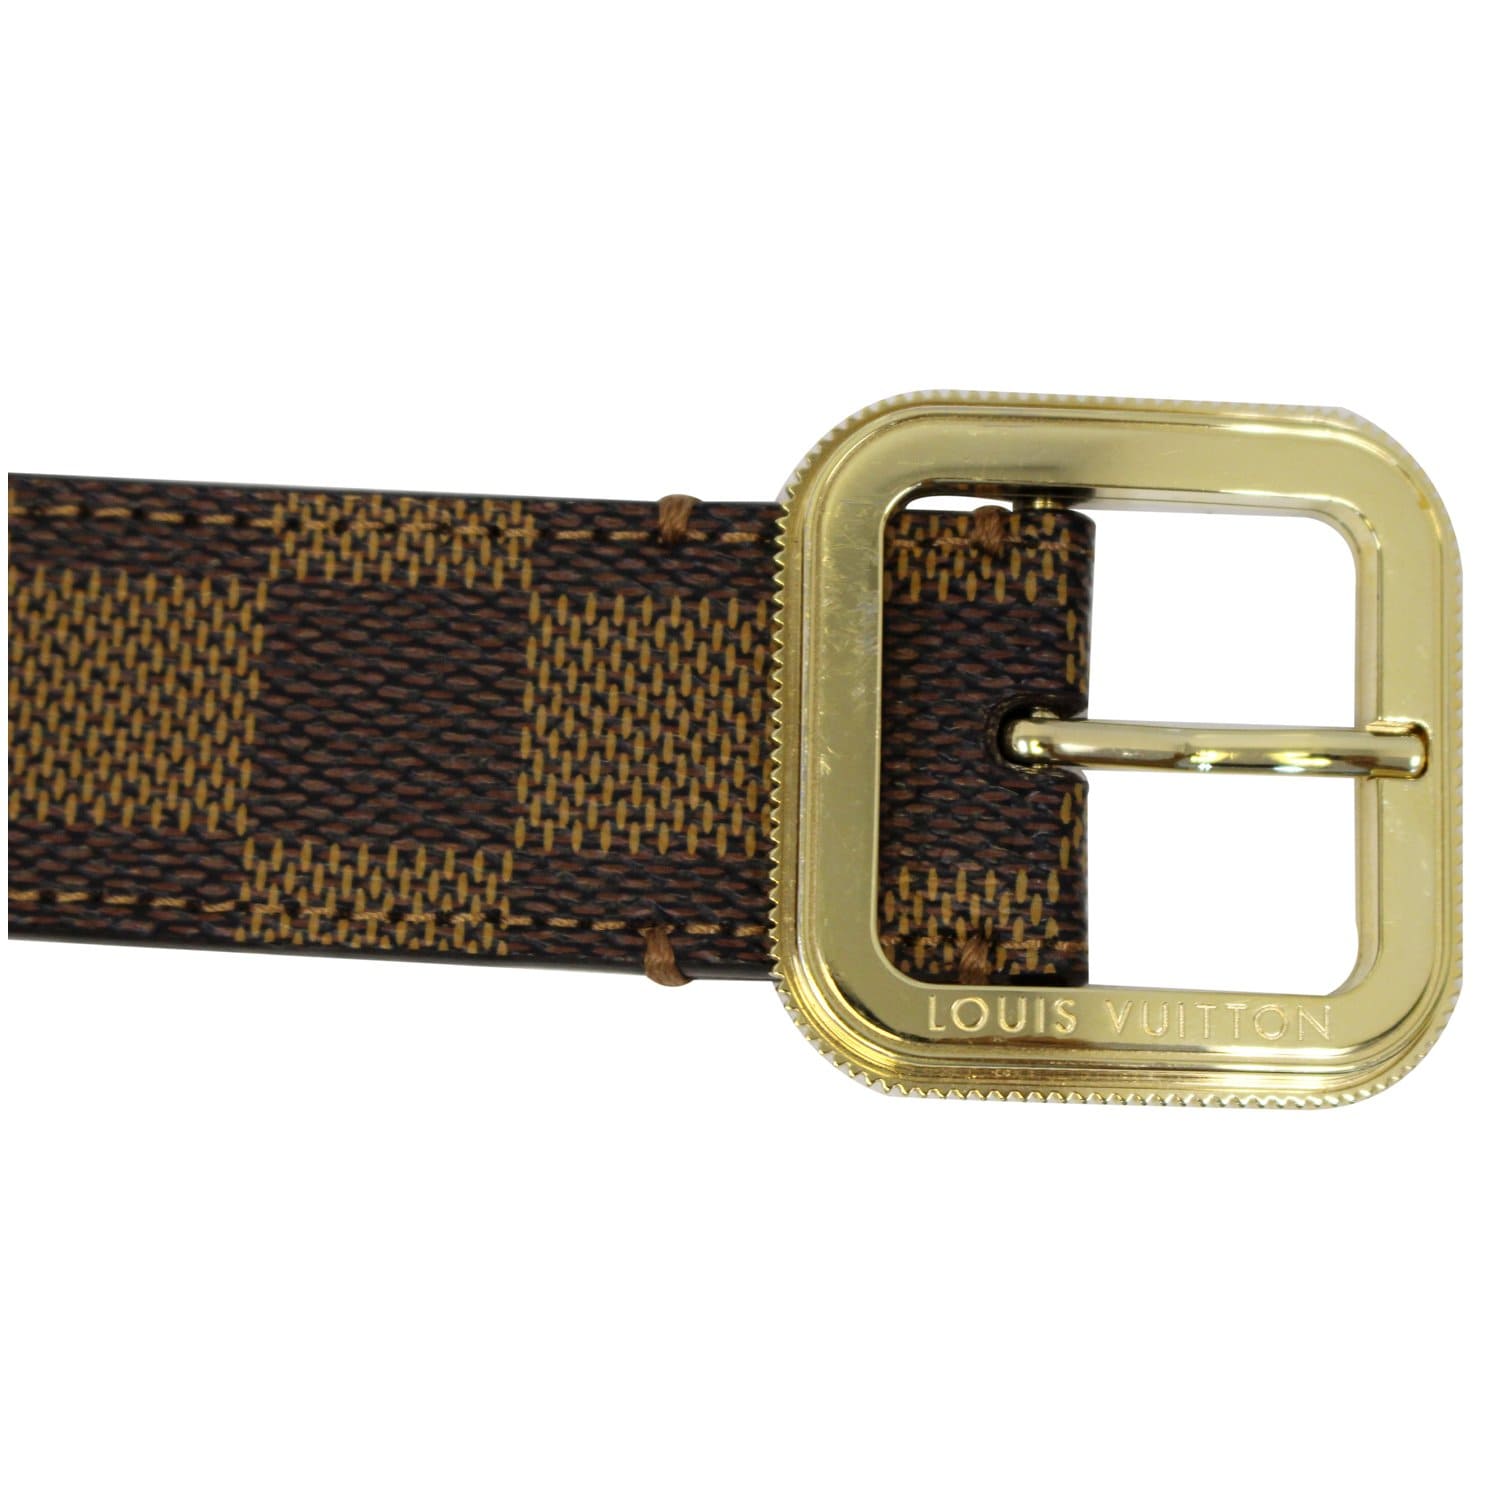 Police Auctions Canada - Louis Vuitton Damier Ebene Belt with LV